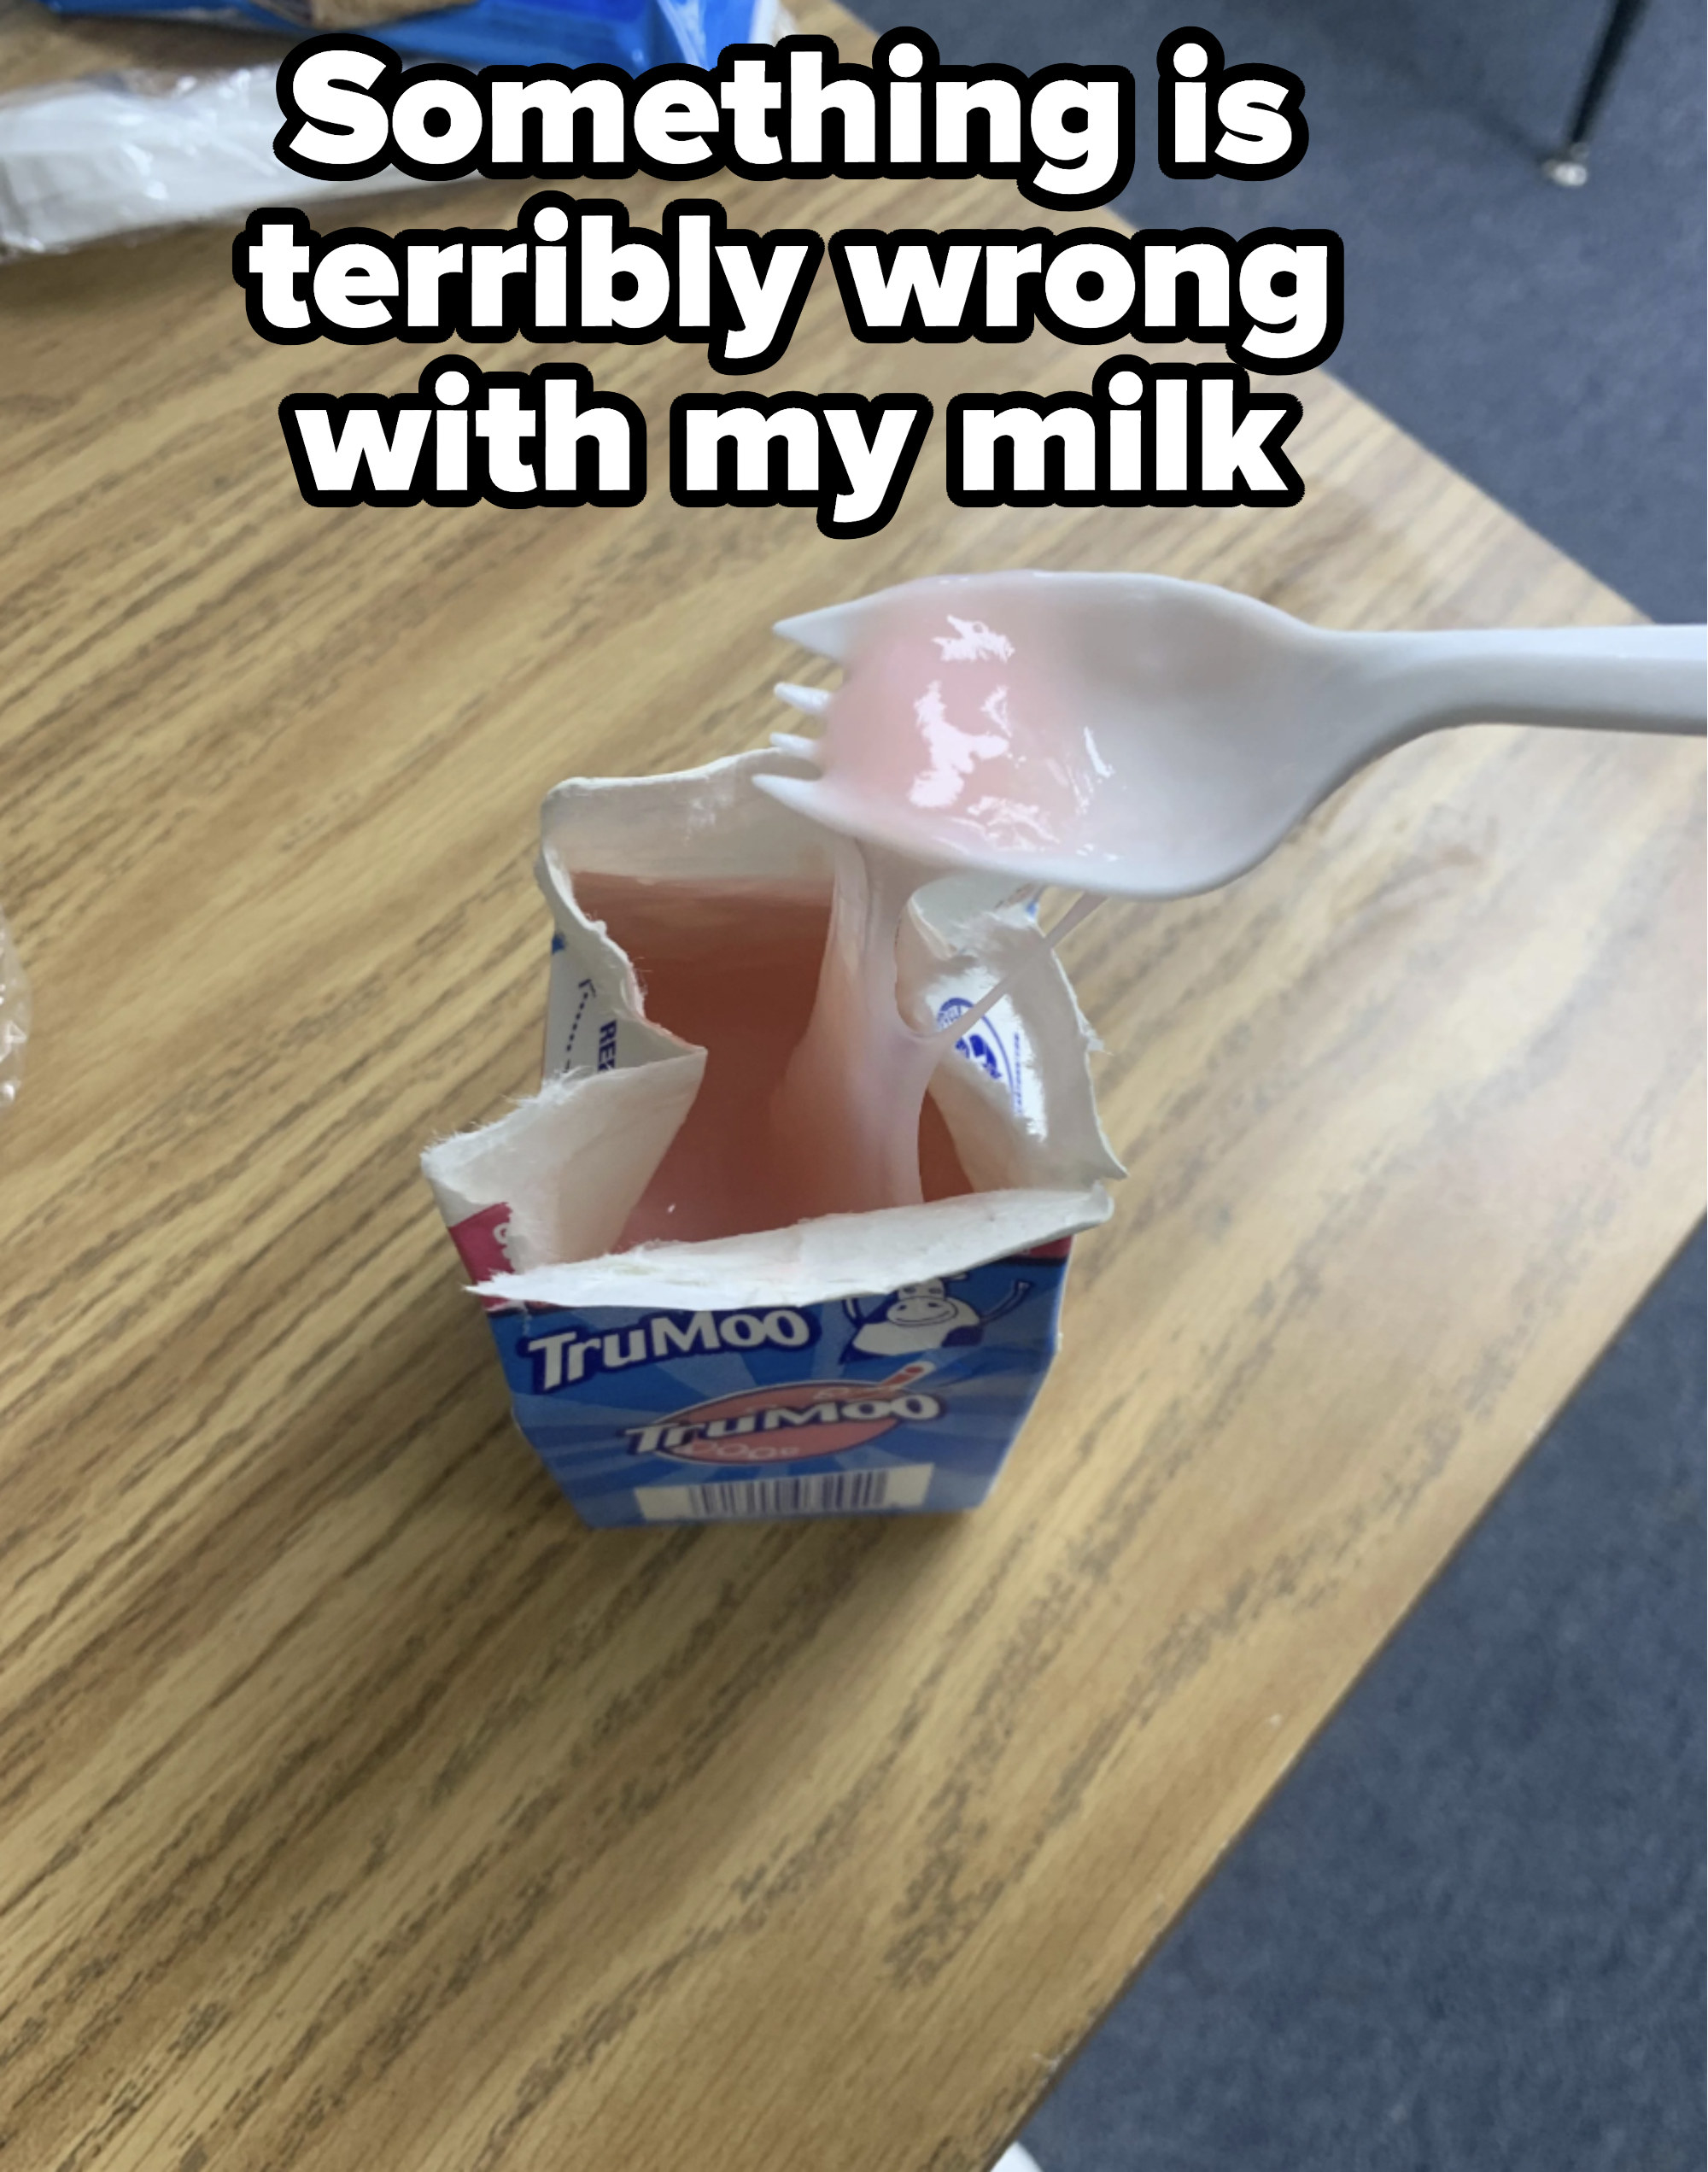 Milk that has turned pink and goopy